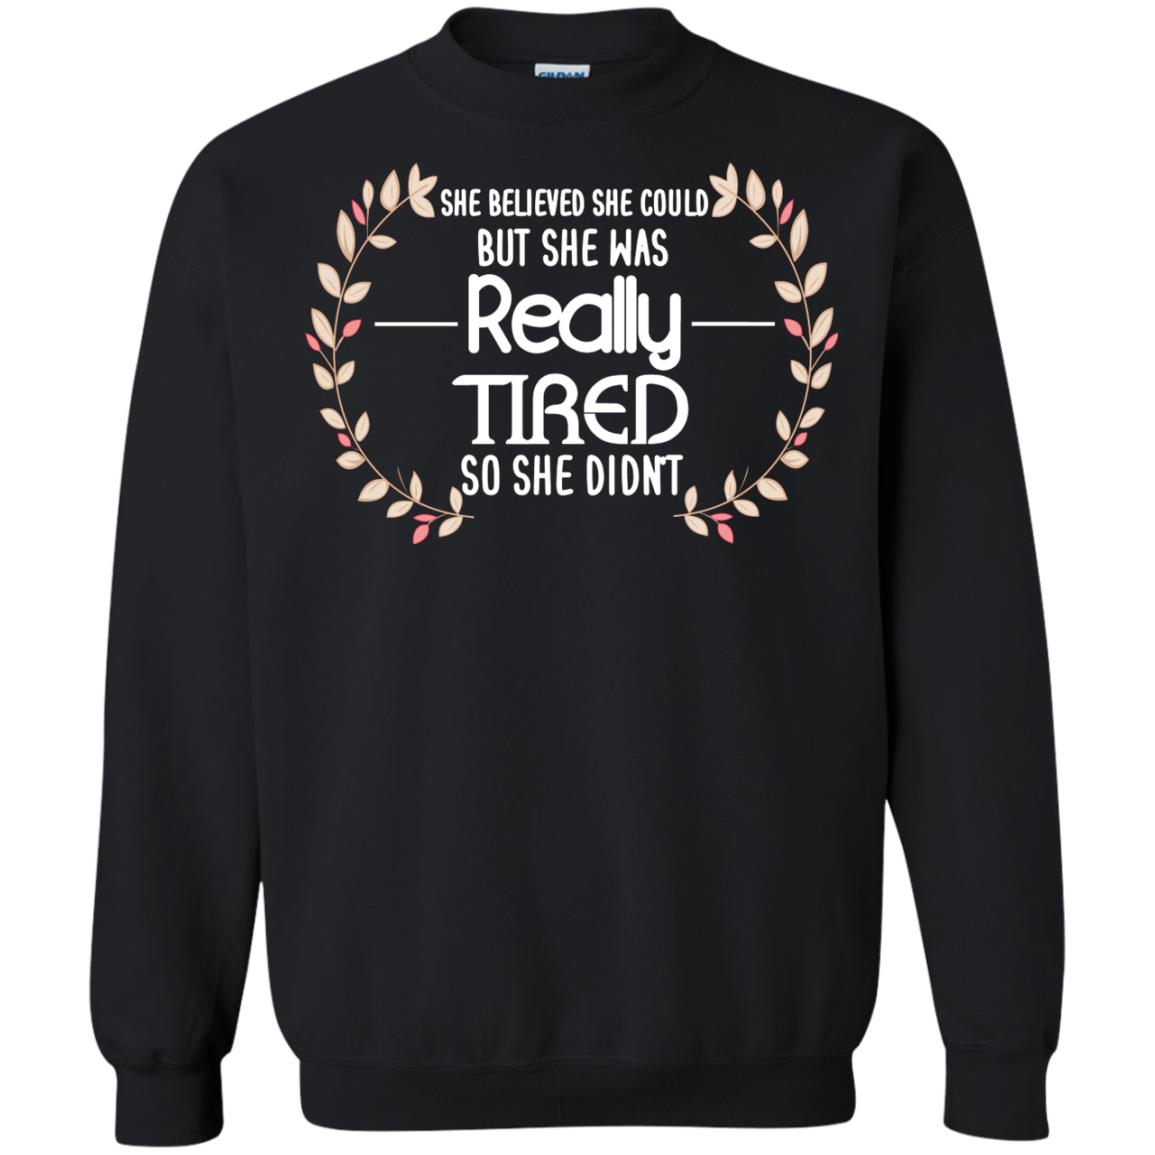 She Believed She Could But She Was Really Tired So She Didn't ShirtG180 Gildan Crewneck Pullover Sweatshirt 8 oz.